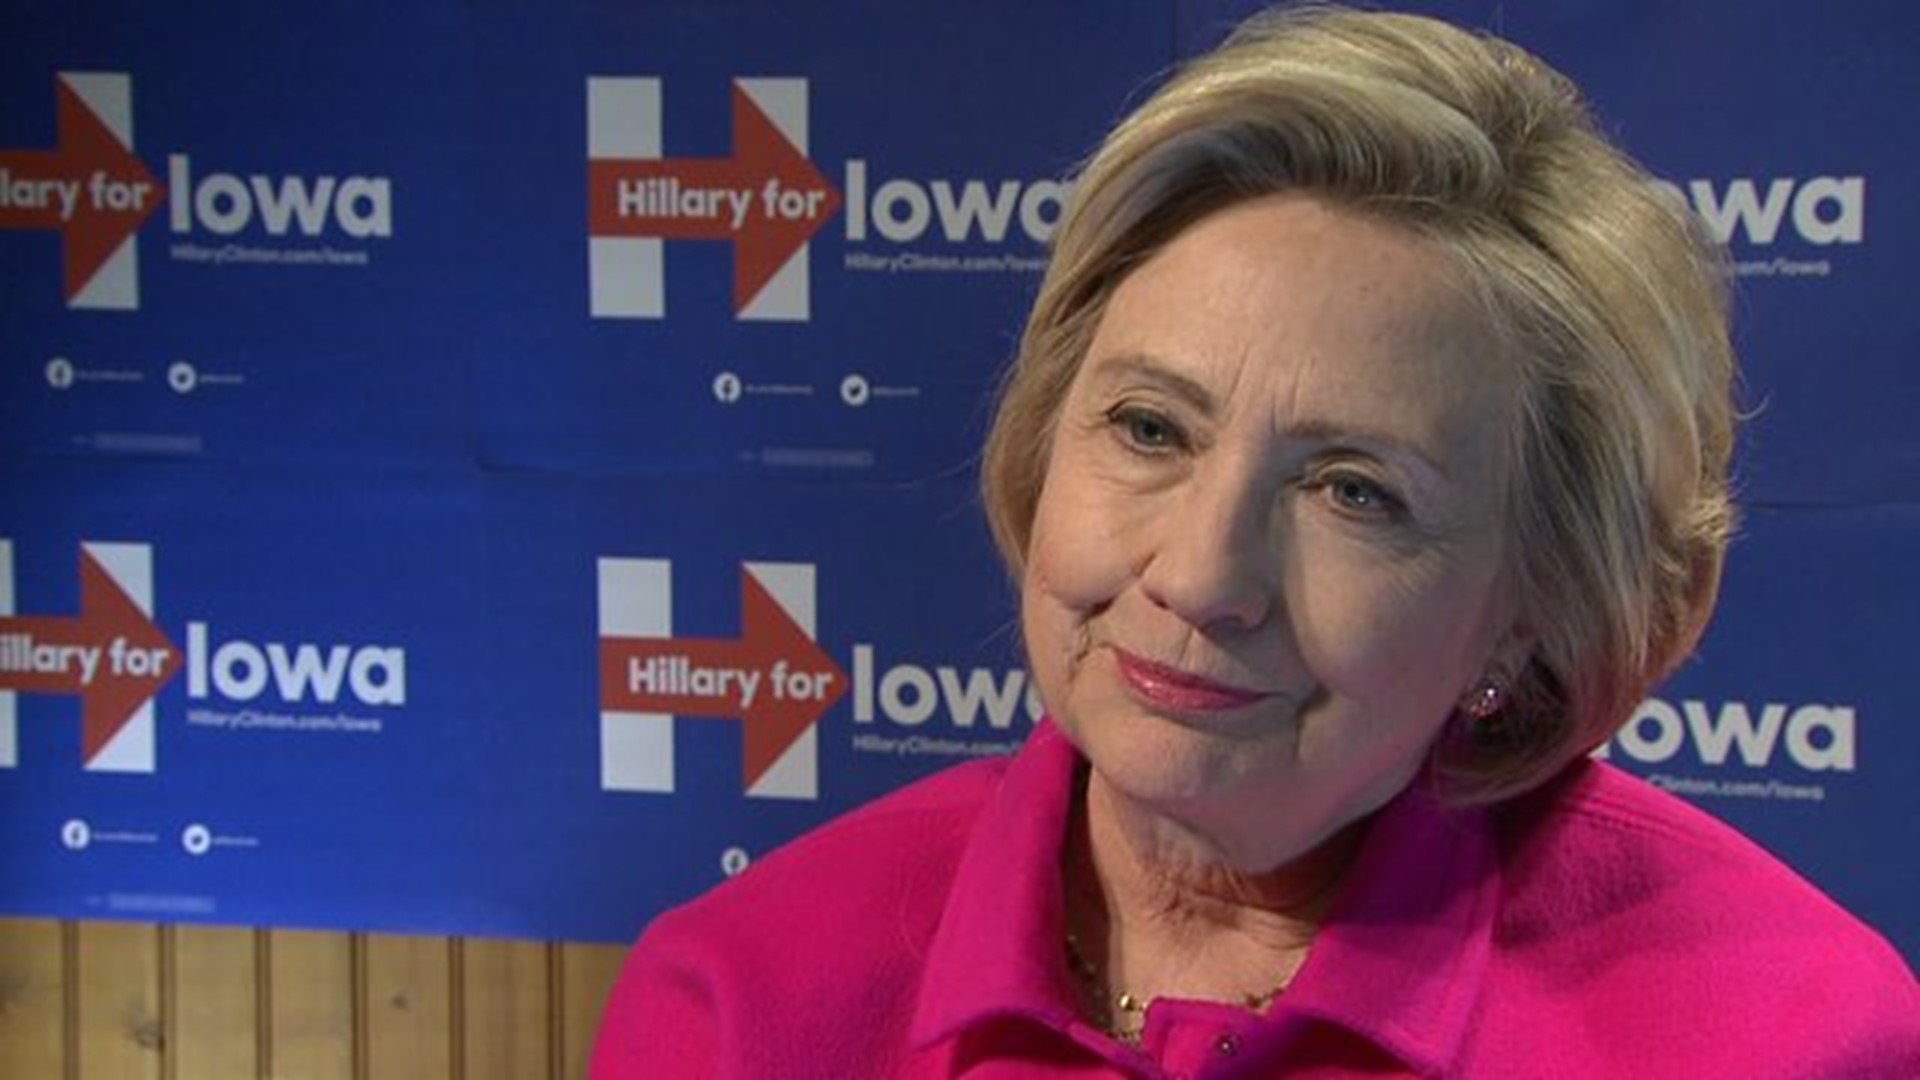 WQAD EXCLUSIVE: Hillary Clinton part 1 of 2